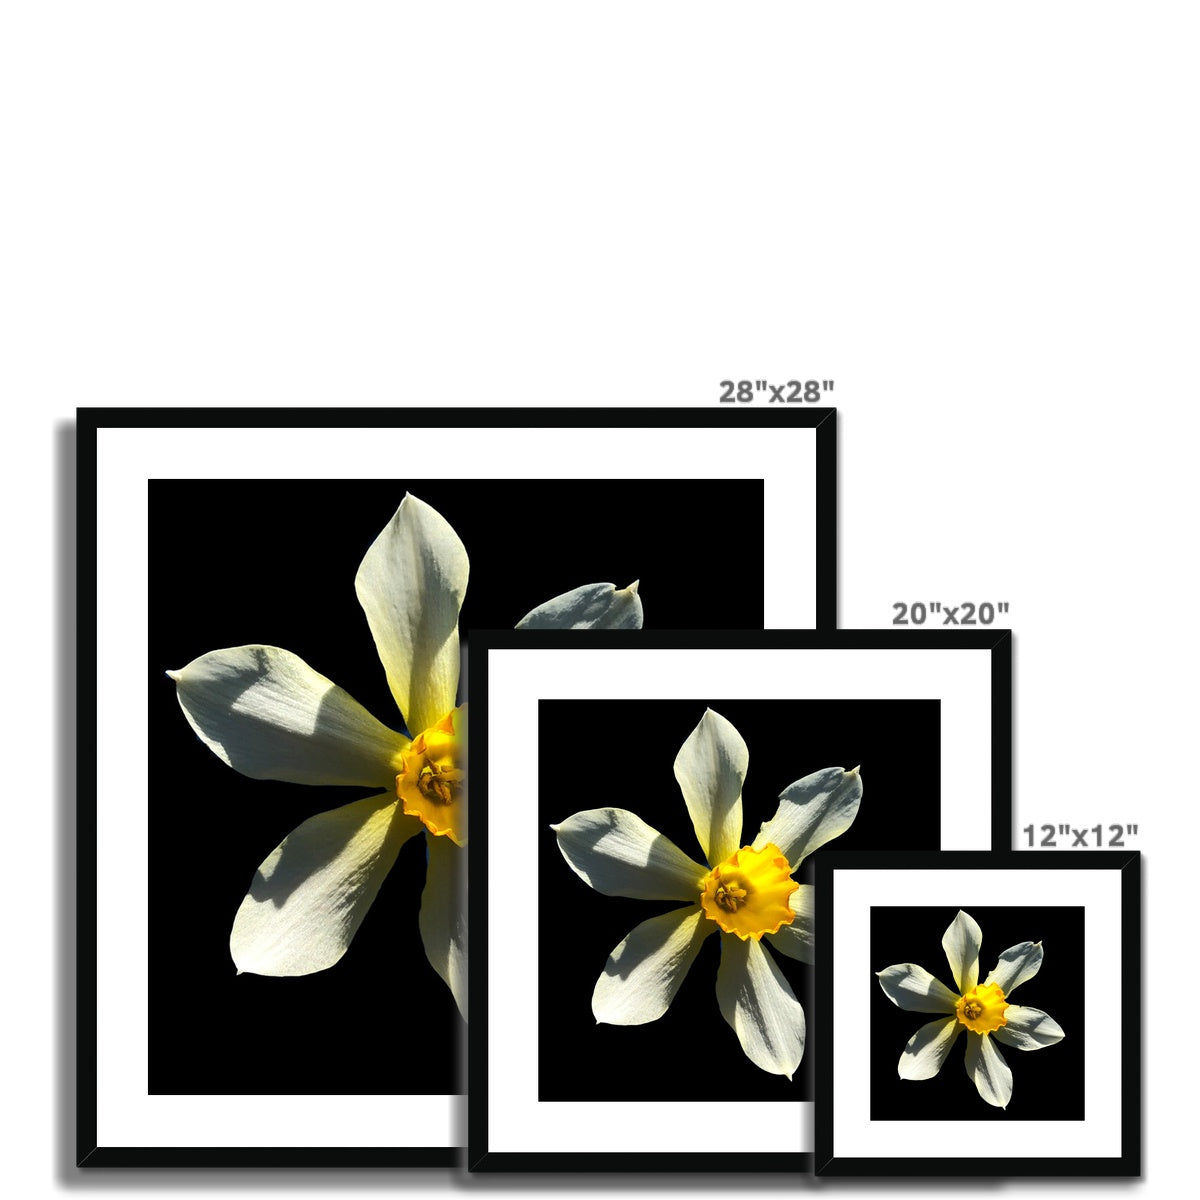 Daffodil Flower Print Framed & Mounted Print - Nature of Flowers